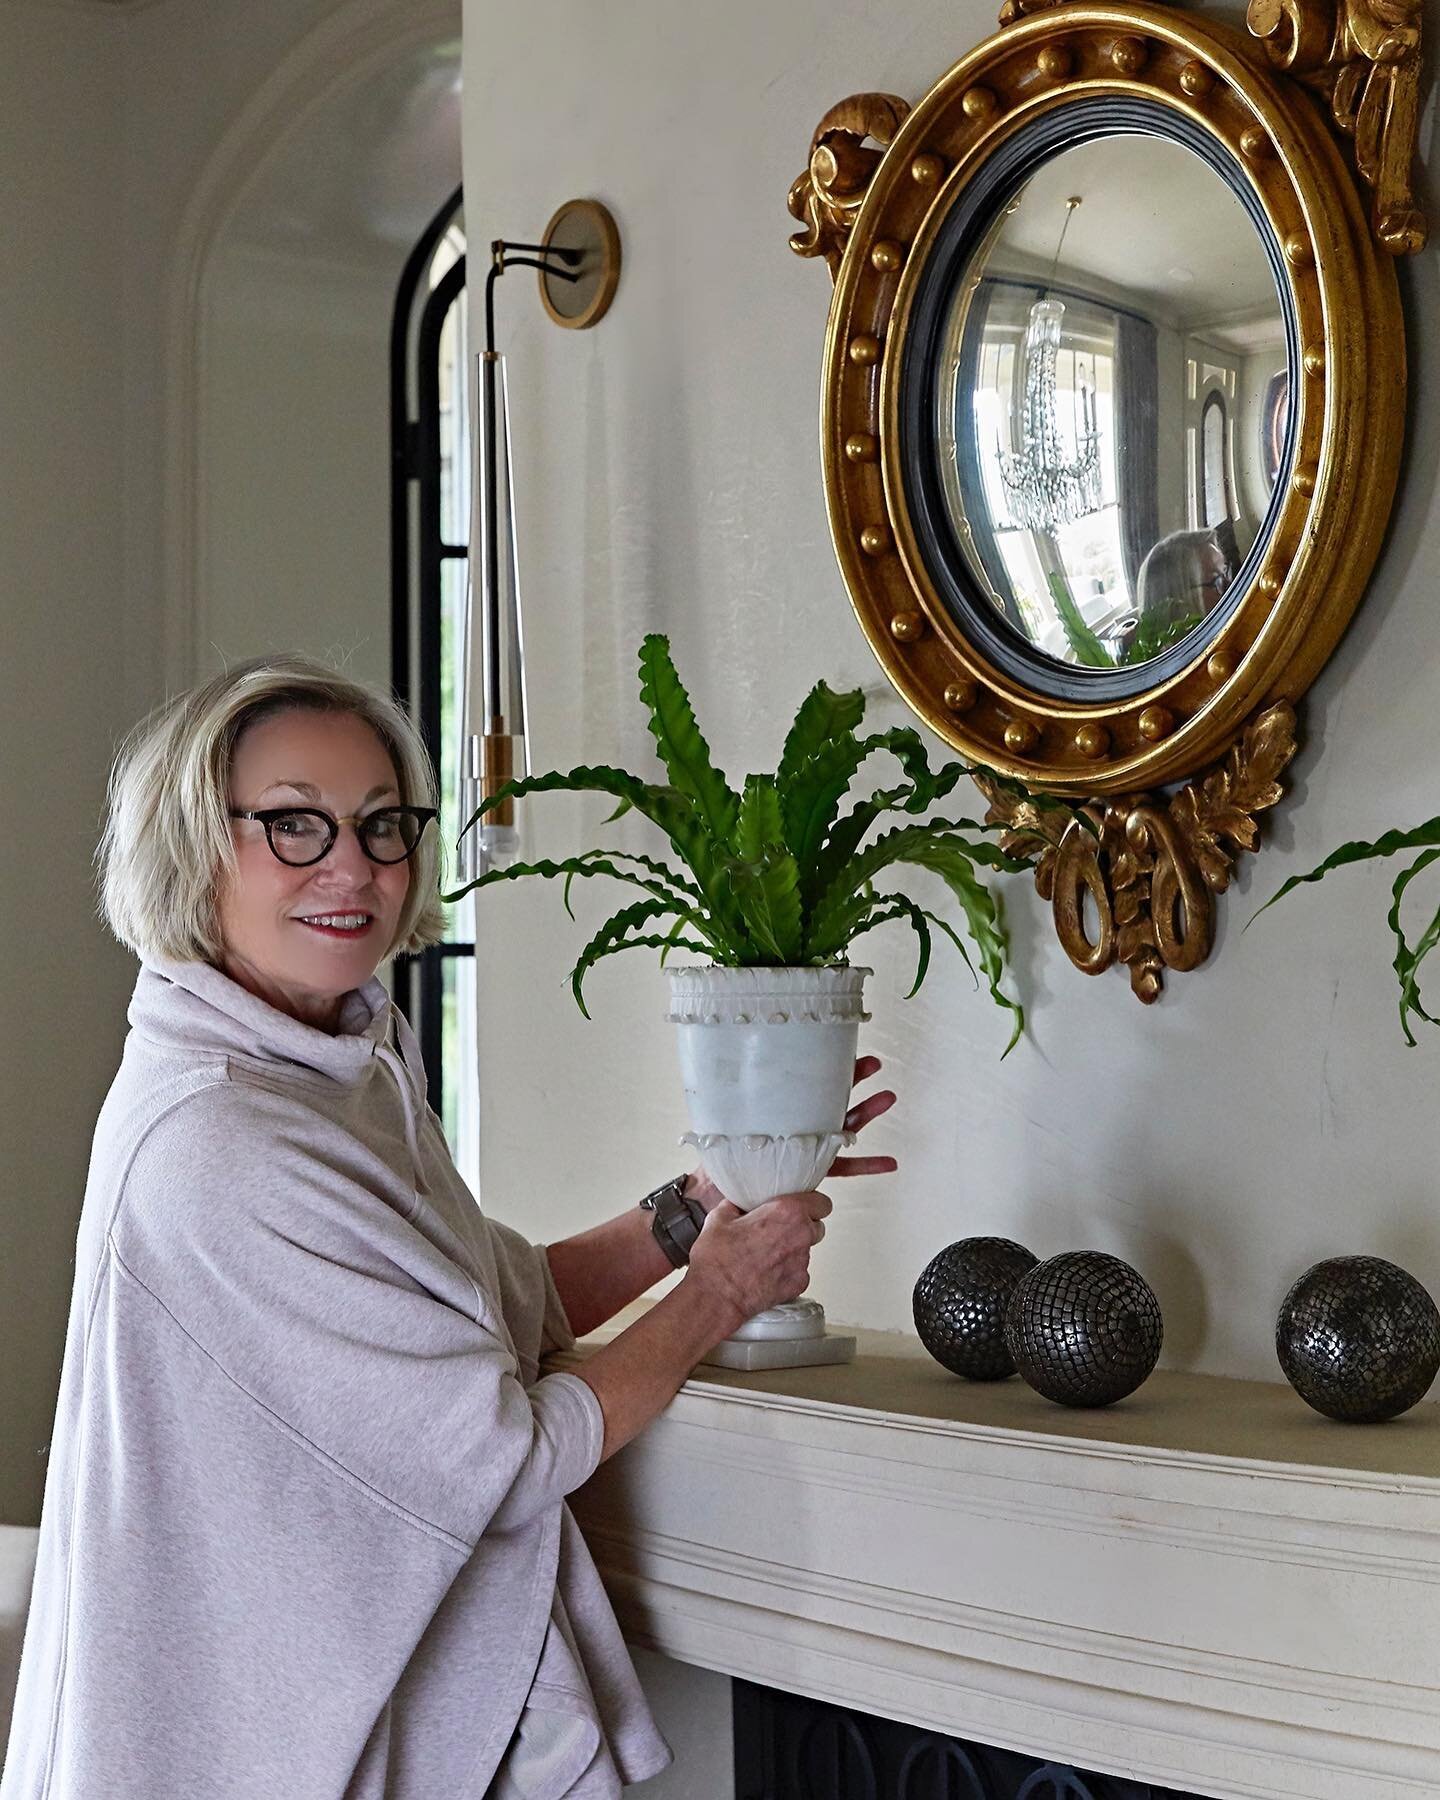 &ldquo;The easiest way to liven up a space is to add a potted plant or simple floral arrangement 🌿 While this mantle is magical when minimal, it still needed something 🌿 So we potted ferns in a pair of ceramic urns. We placed one on each side of th